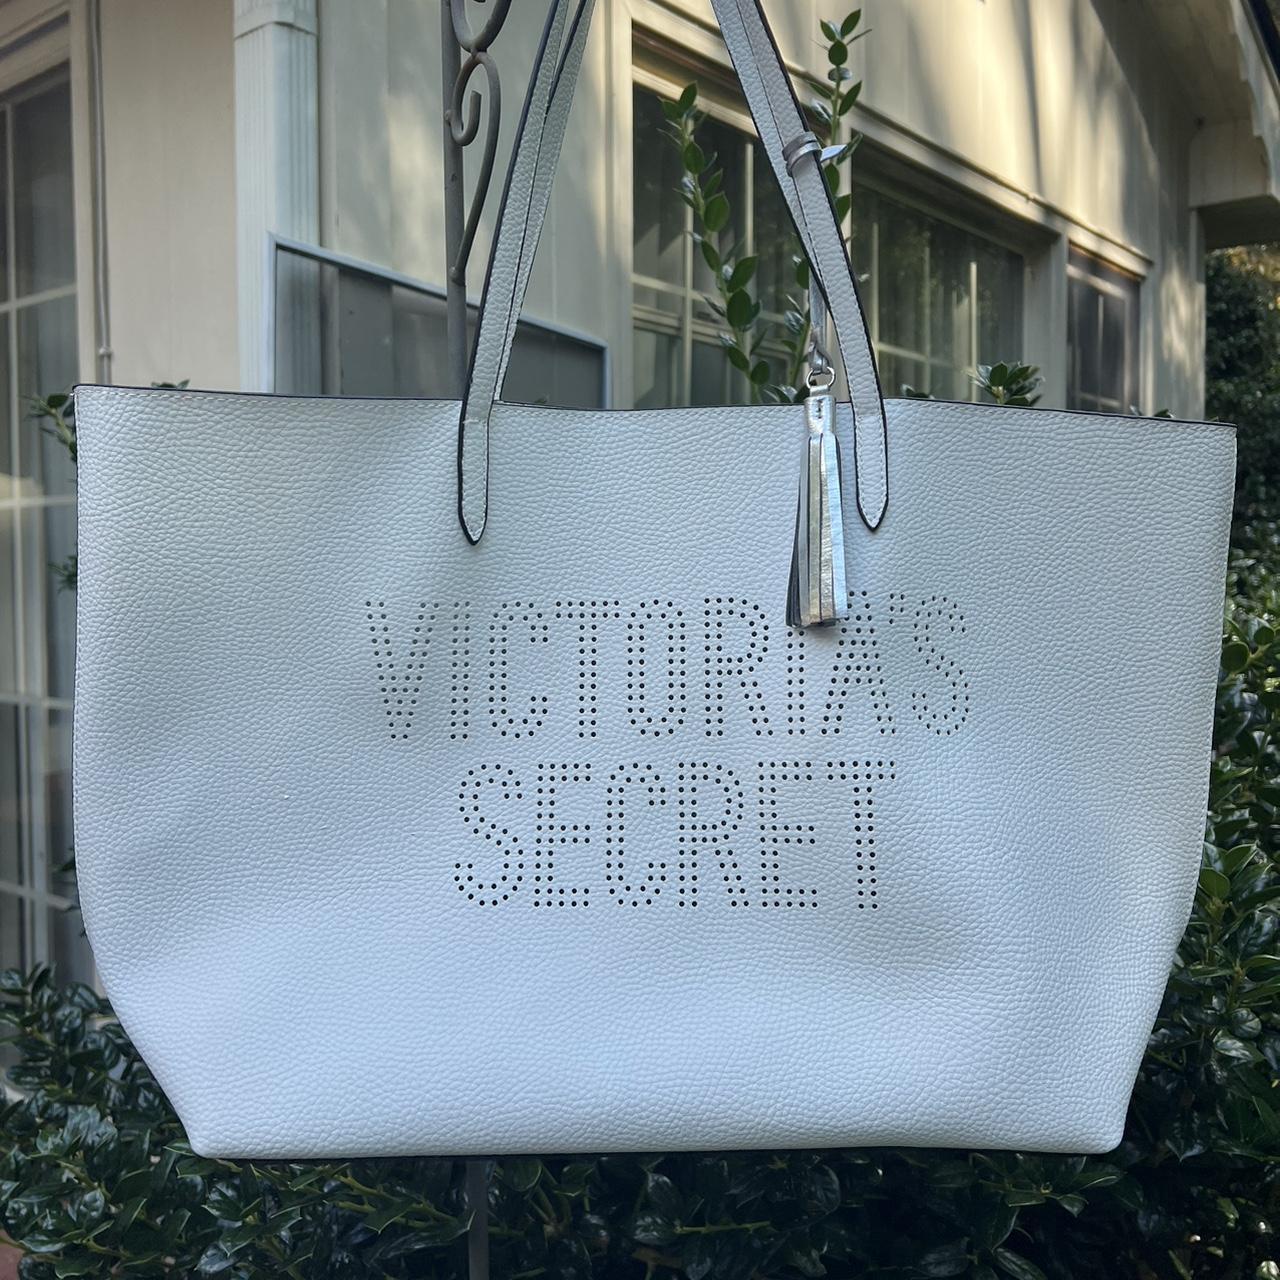 Victoria’s Secret tote bag with a laser-cut logo and